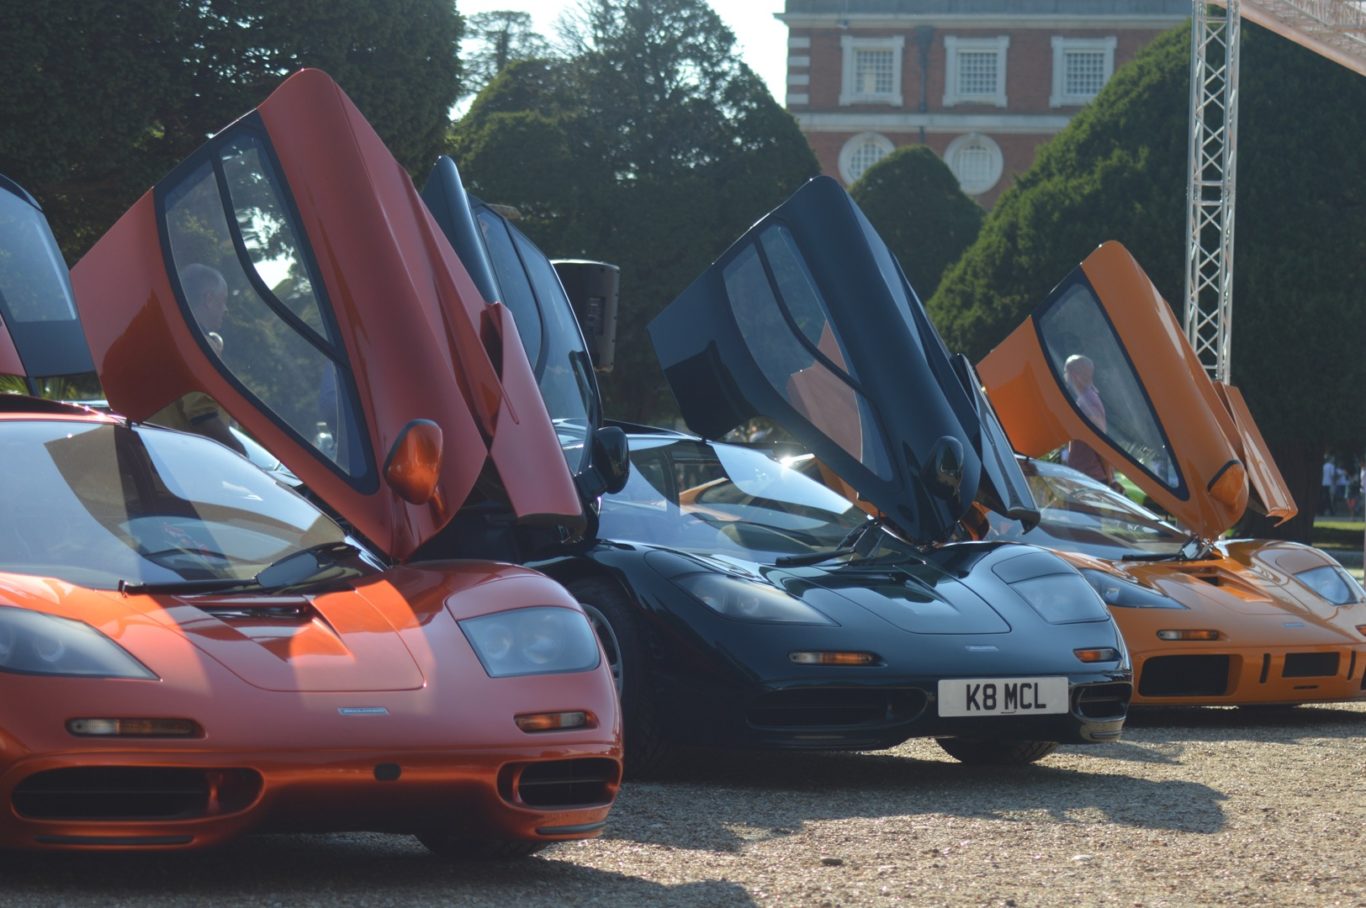 Before there was Pure McLaren, there was the McLaren F1 Owners’ Club, operated and founded by racer Ray Bellm, who achieved much of his success behind the wheel of an F1 GTR